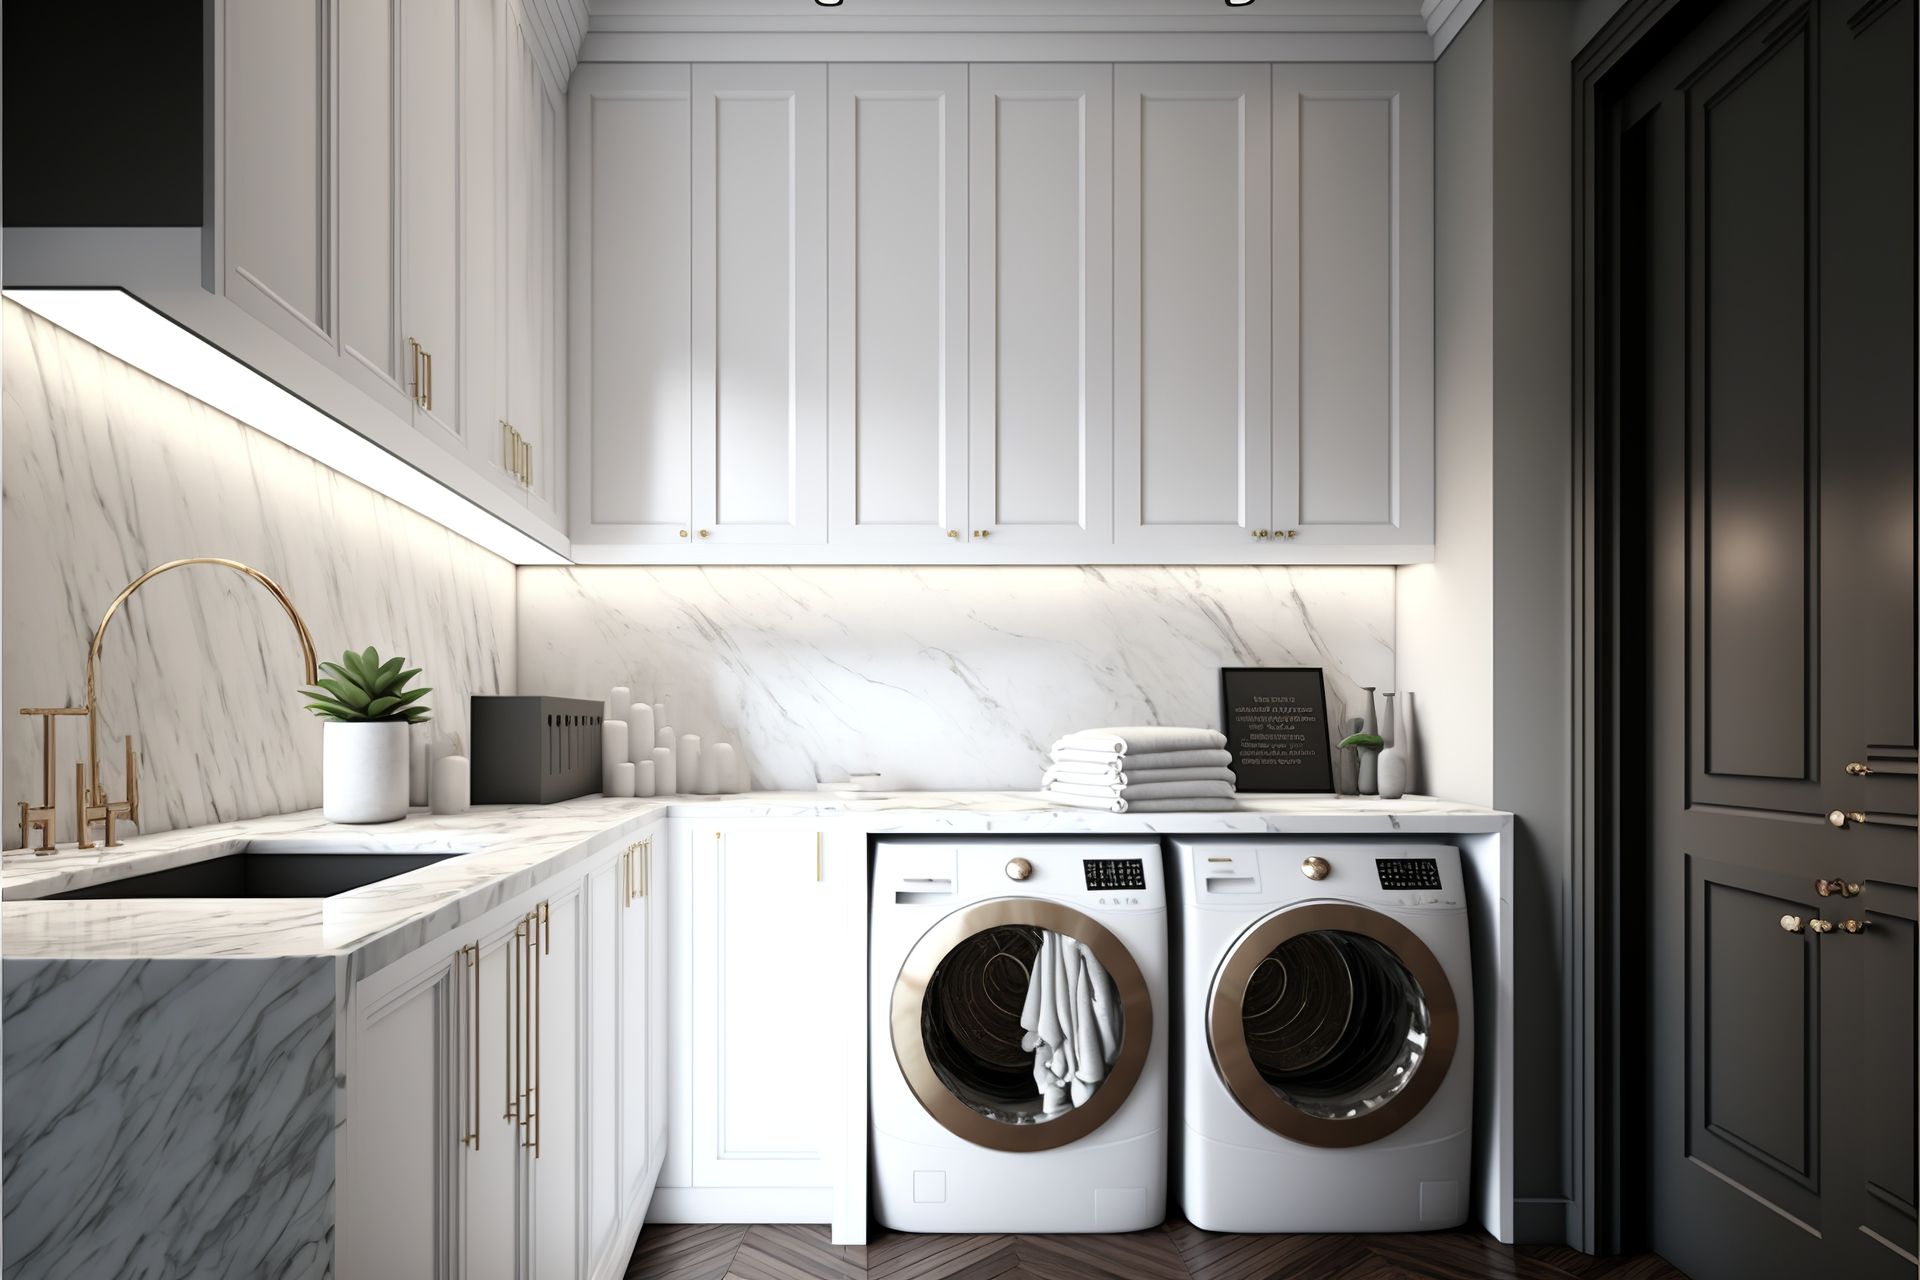 custom white laundry room cabinets with gold accents